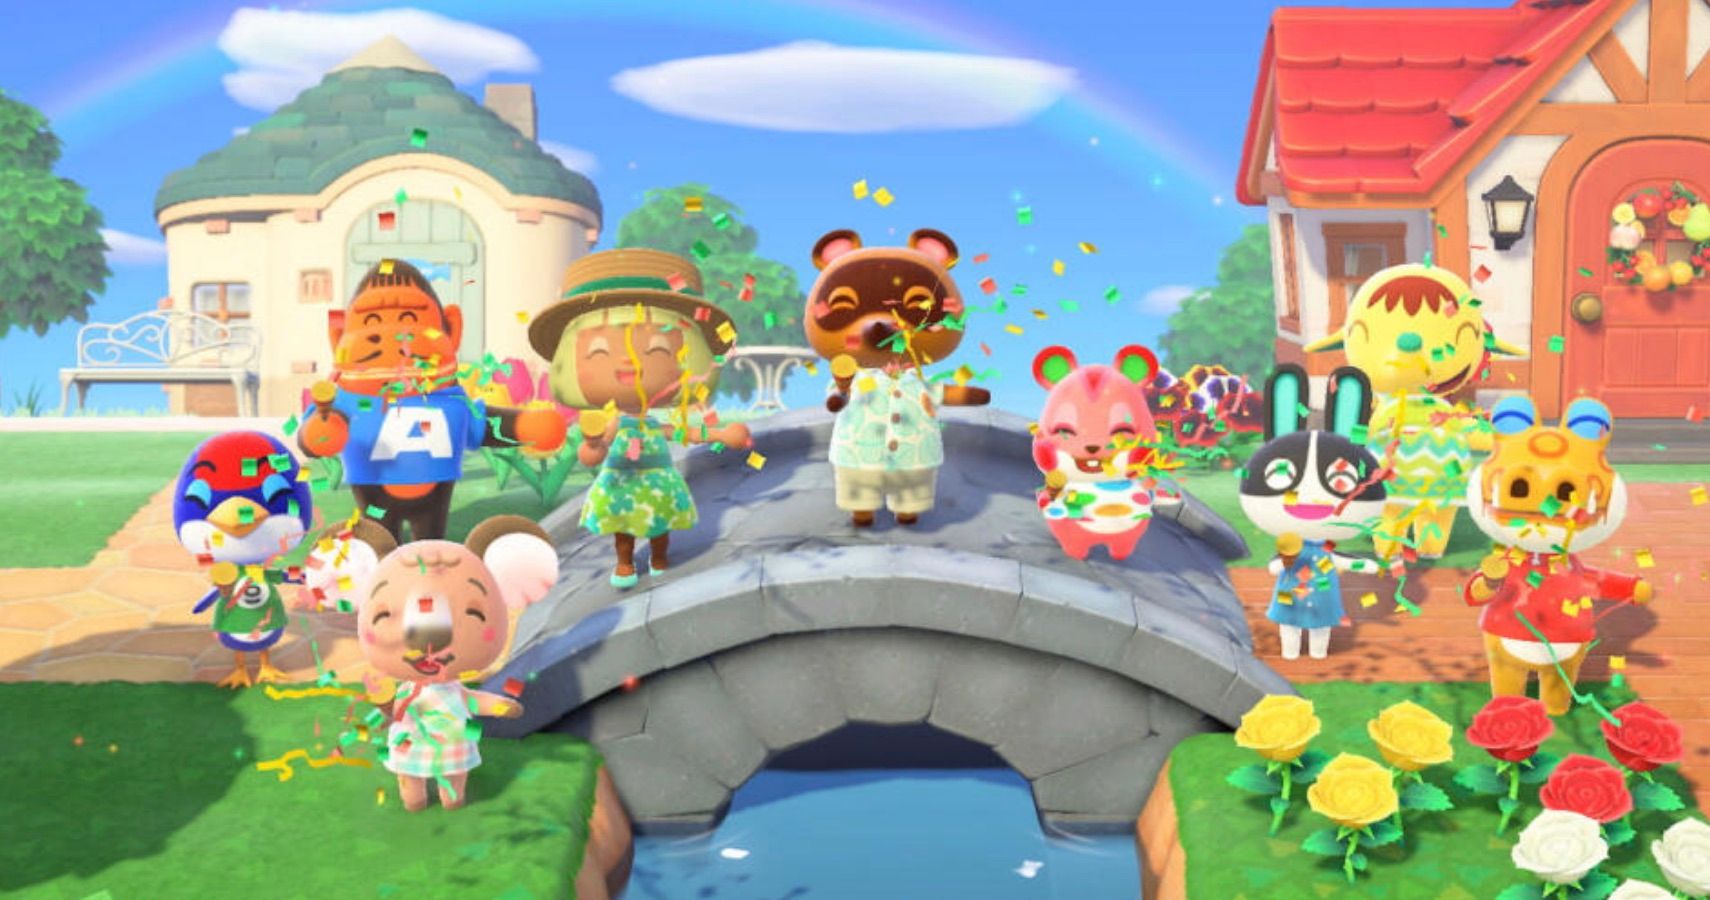 All Animal Crossing New Horizons Online Functions Are Back Up Following Shutdown